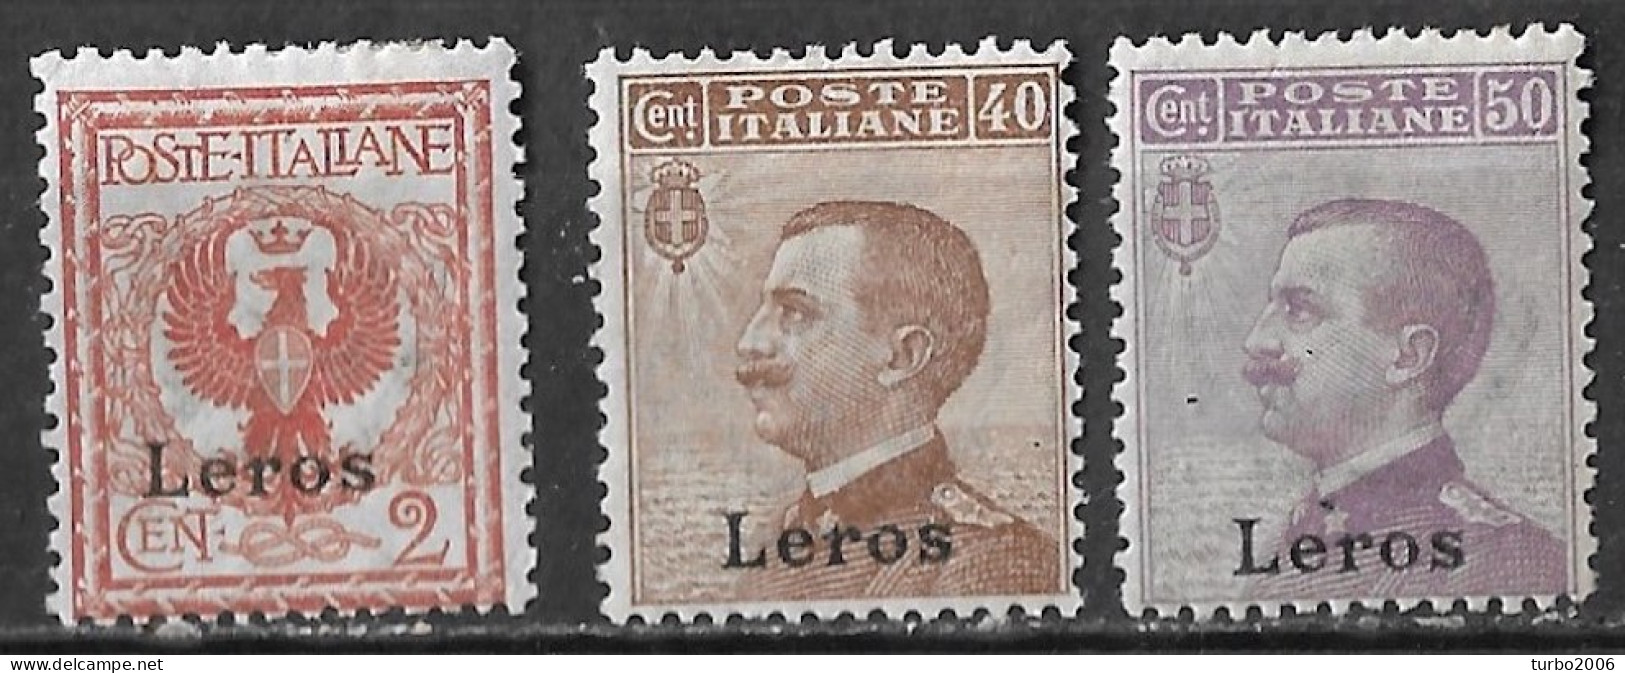 DODECANESE 1912 Italian Stamps With Black Overprint LEROS 3 Values From The Set Vl. 1-6-7 MH - Dodekanisos